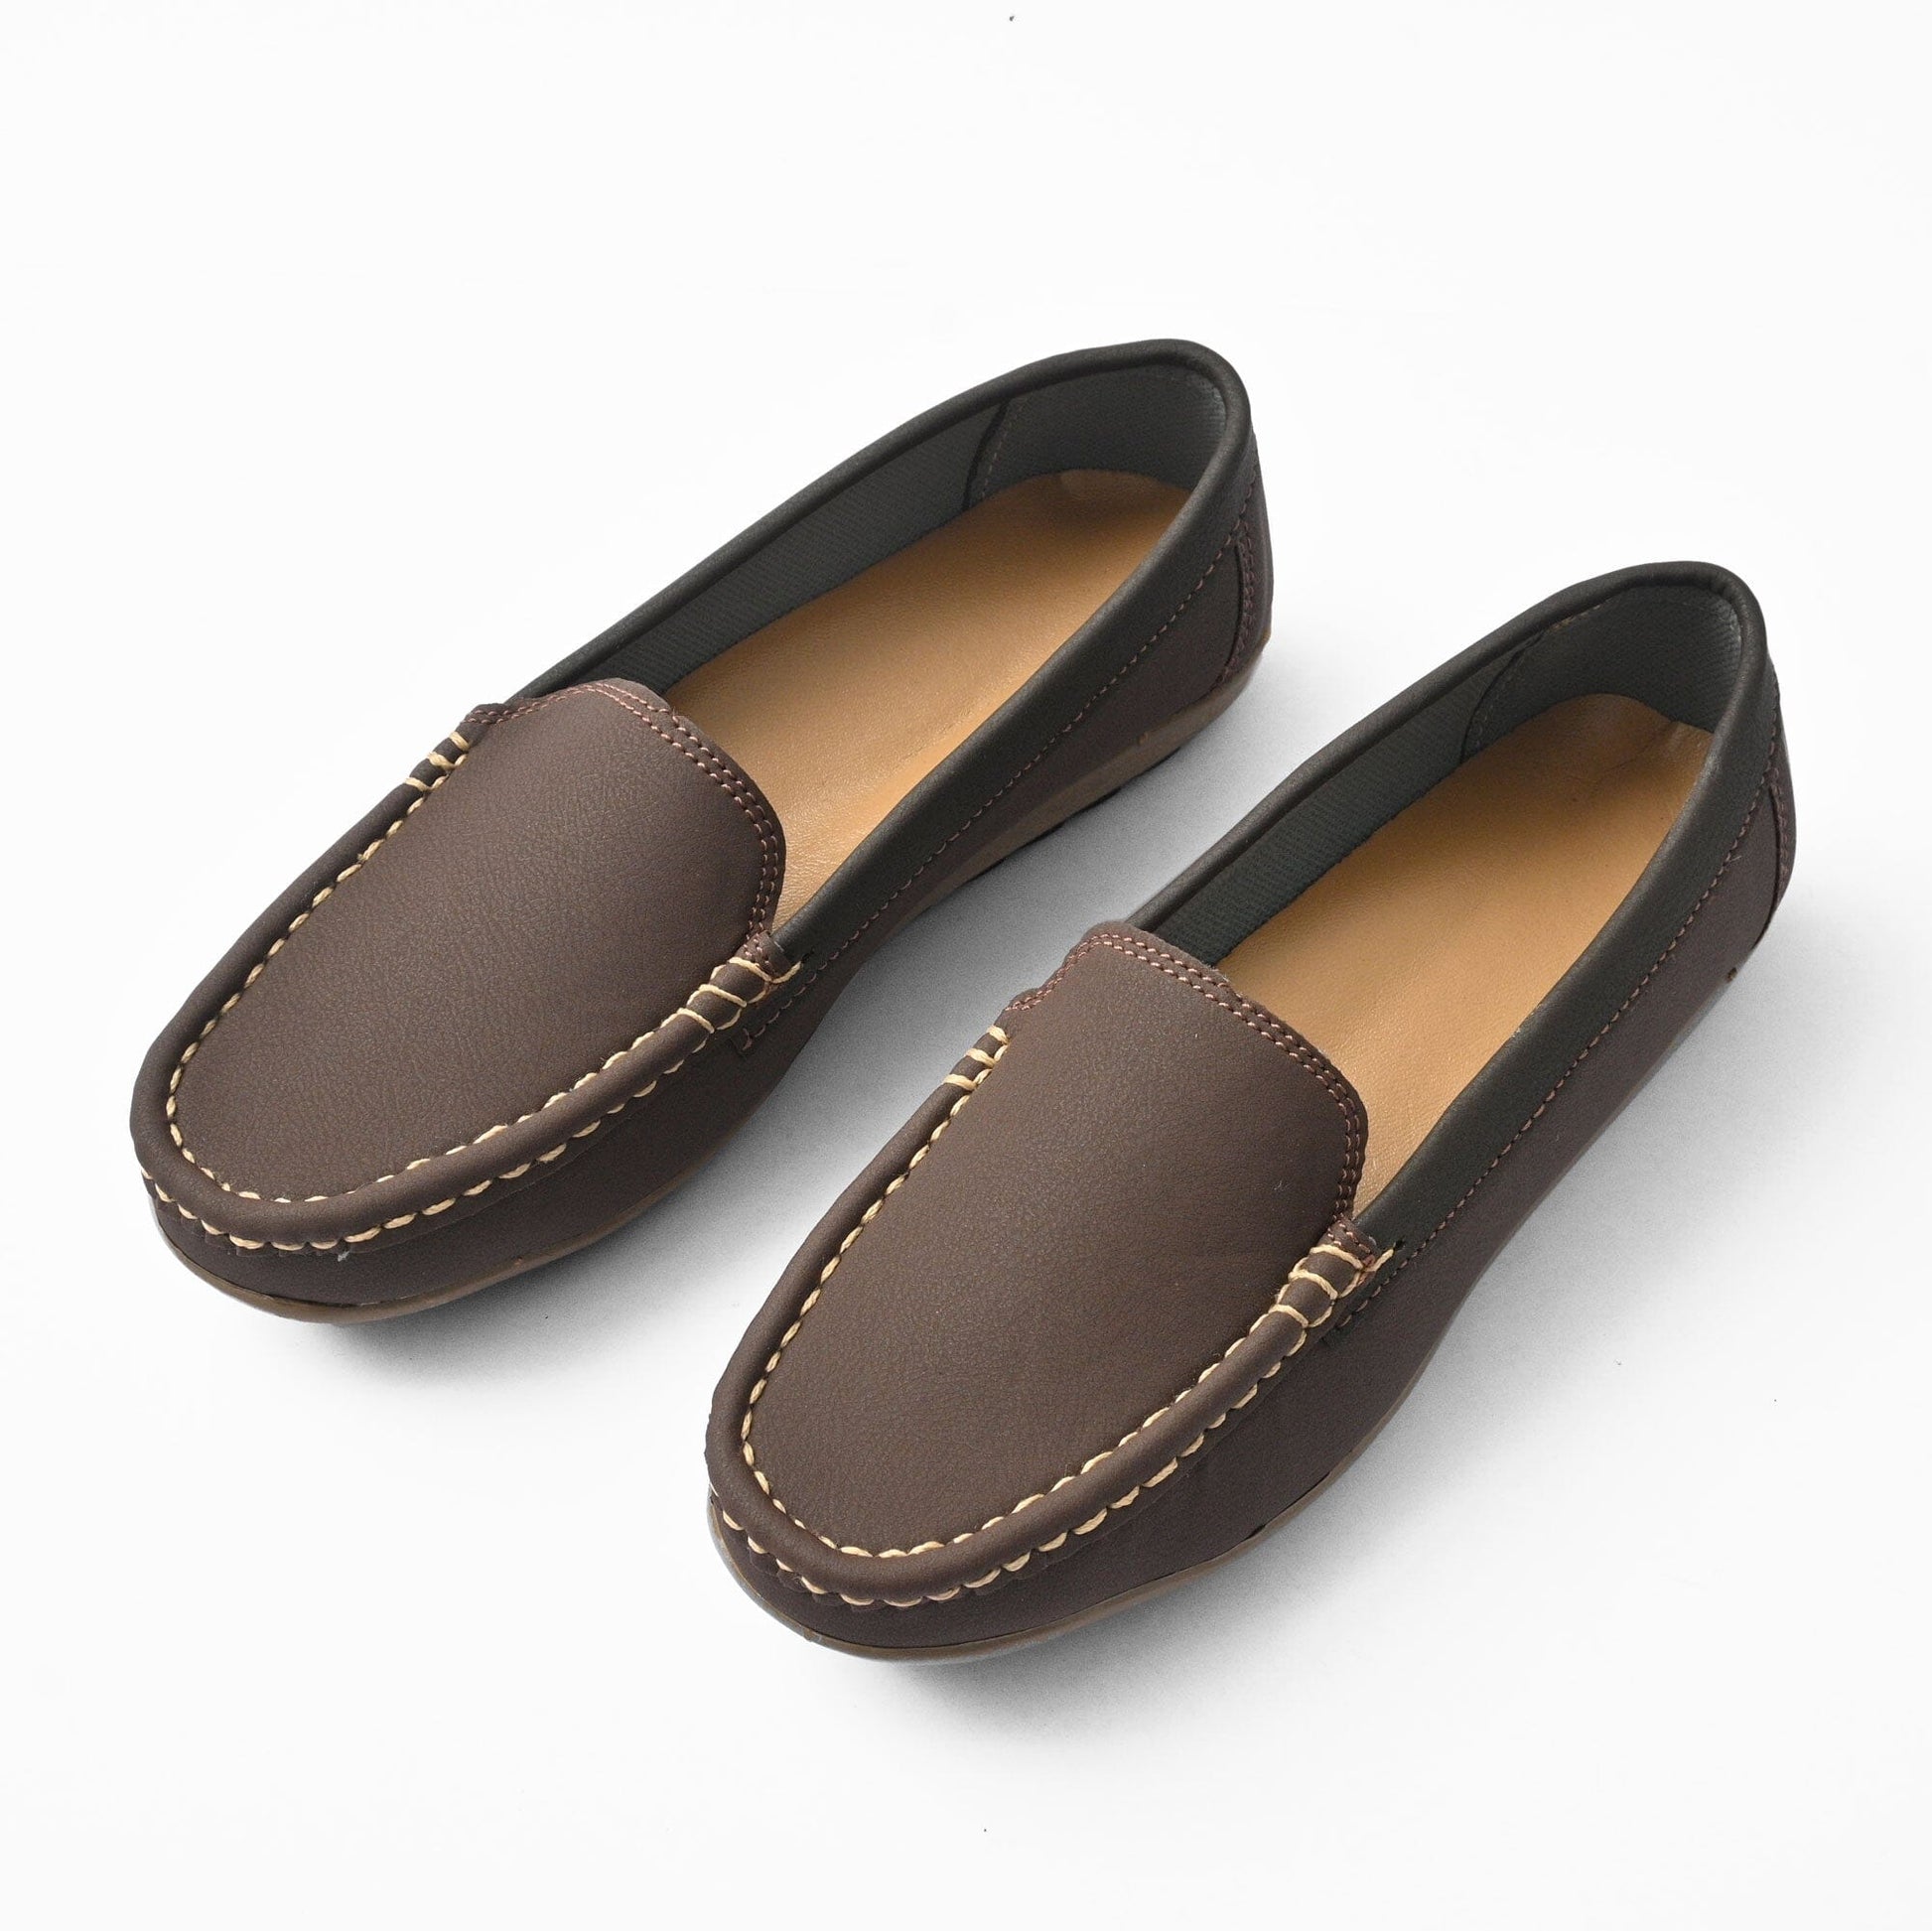 Women's Heredia Moccasin Shoes Women's Shoes SNAN Traders Coffee EUR 35 